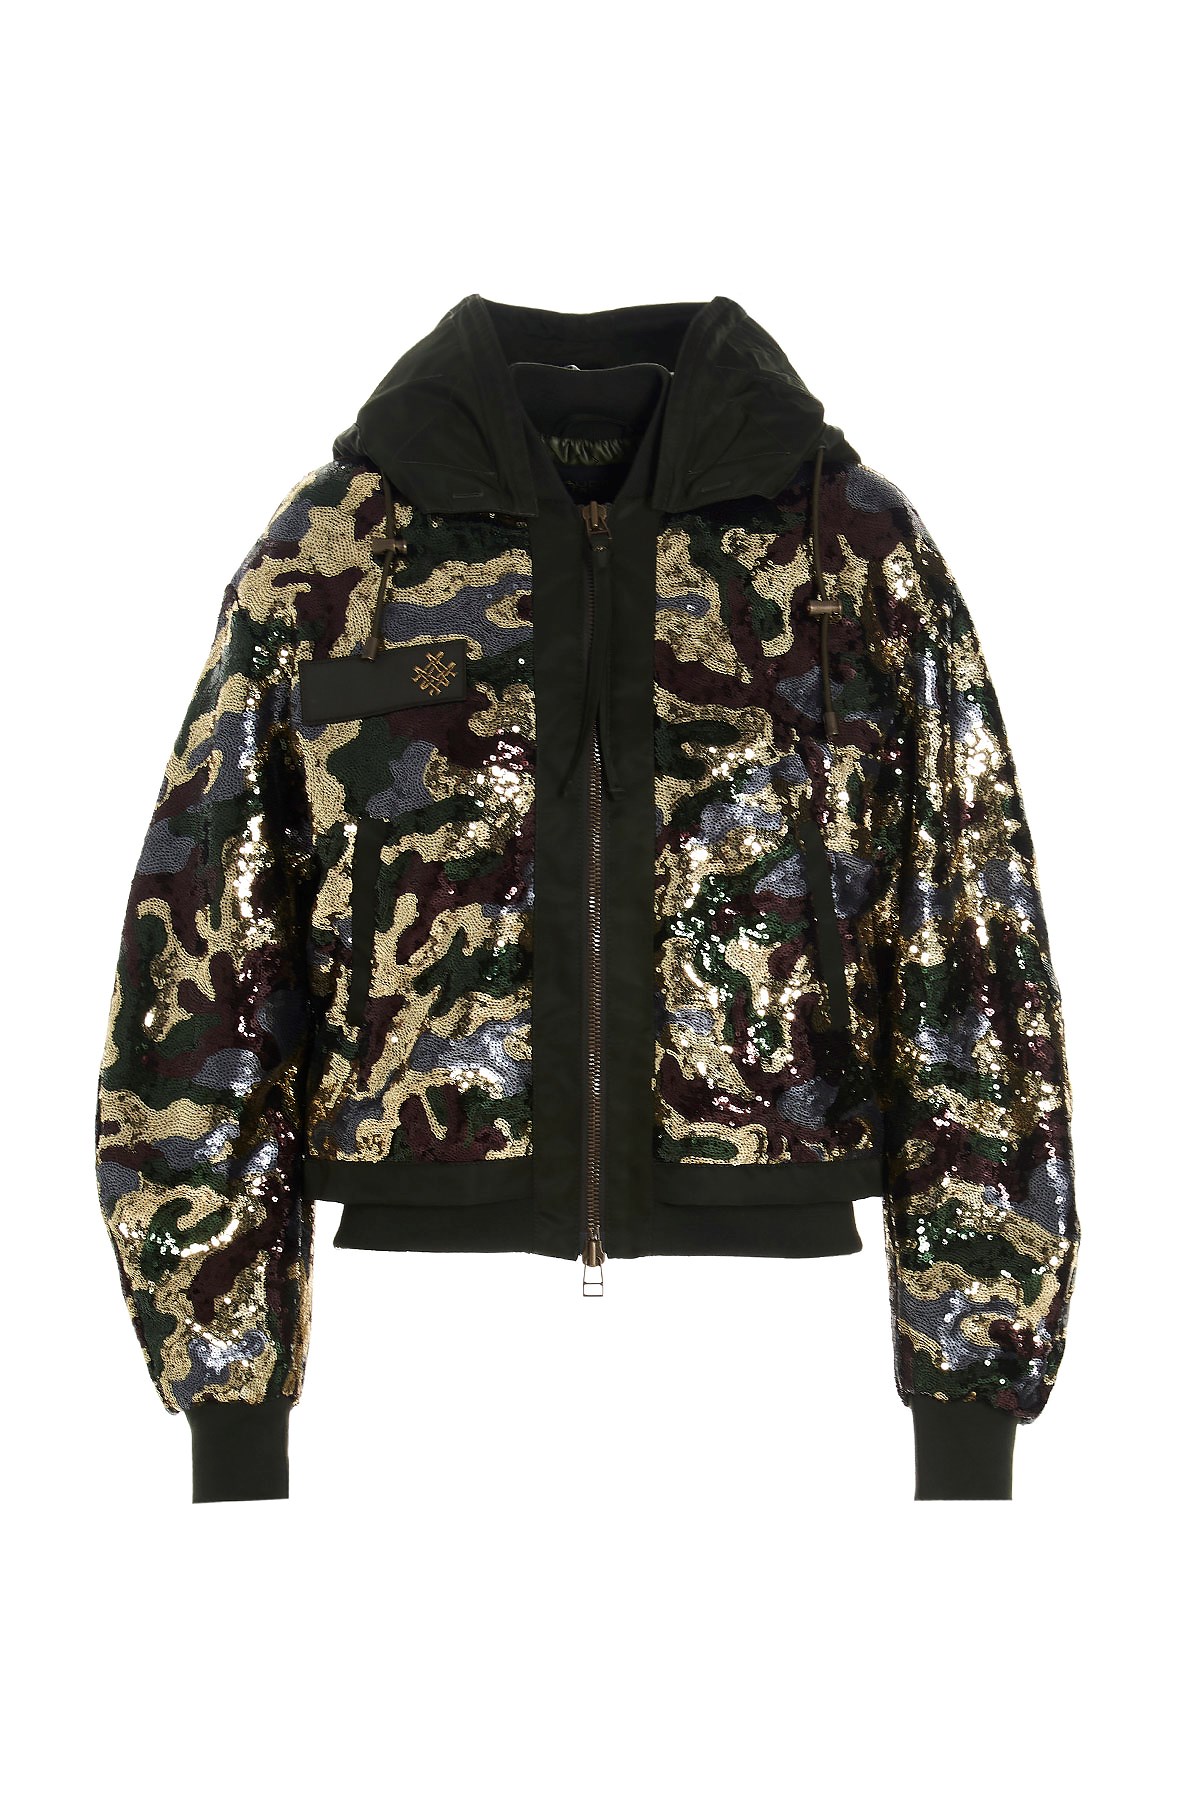 MR & MRS ITALY Audrey Tritto Collaboration Camouflage Sequin Bomber Ja